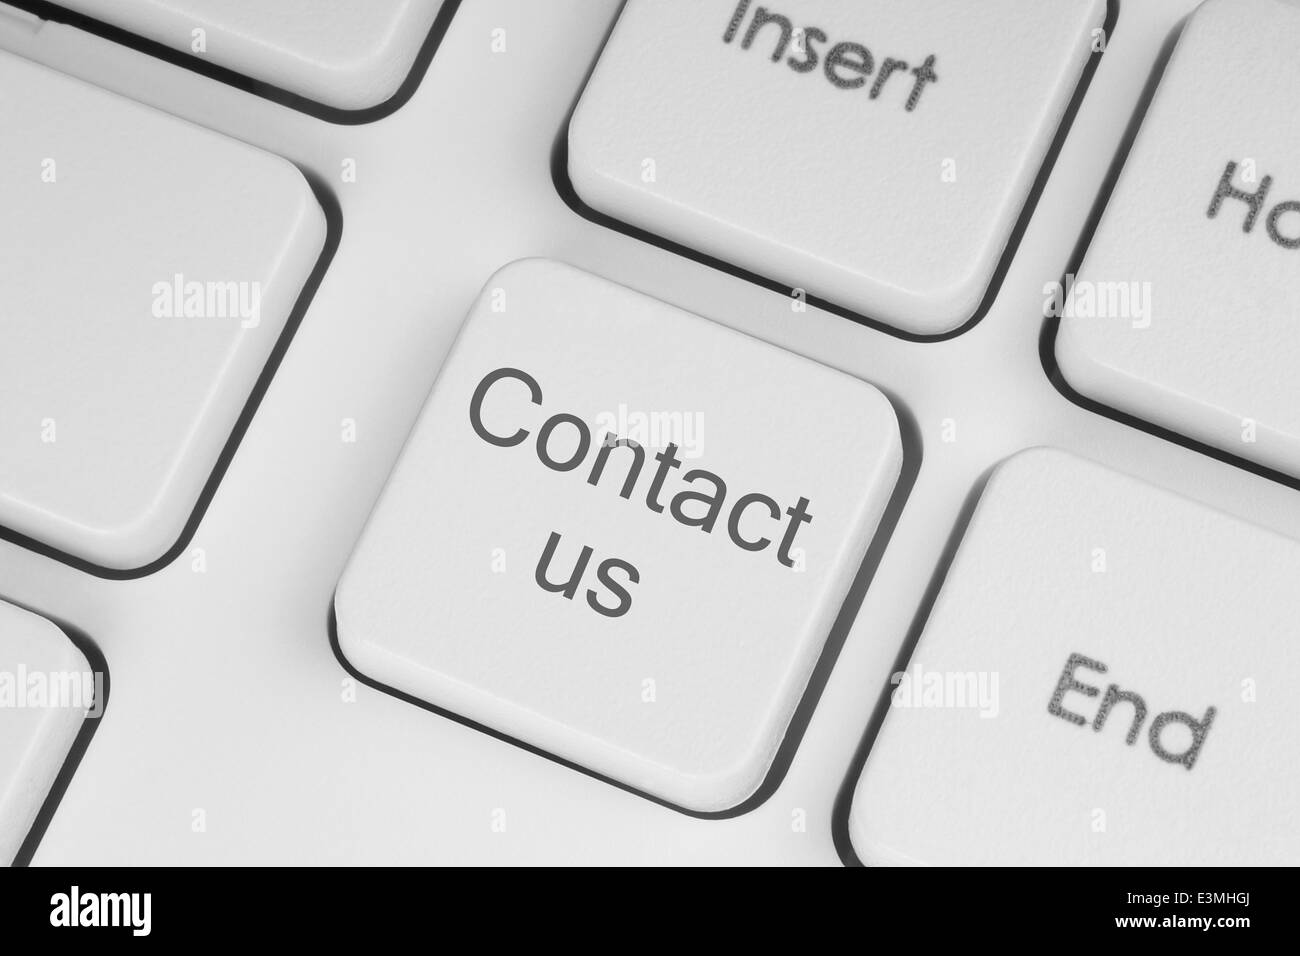 Contact us keyboard button close-up Stock Photo